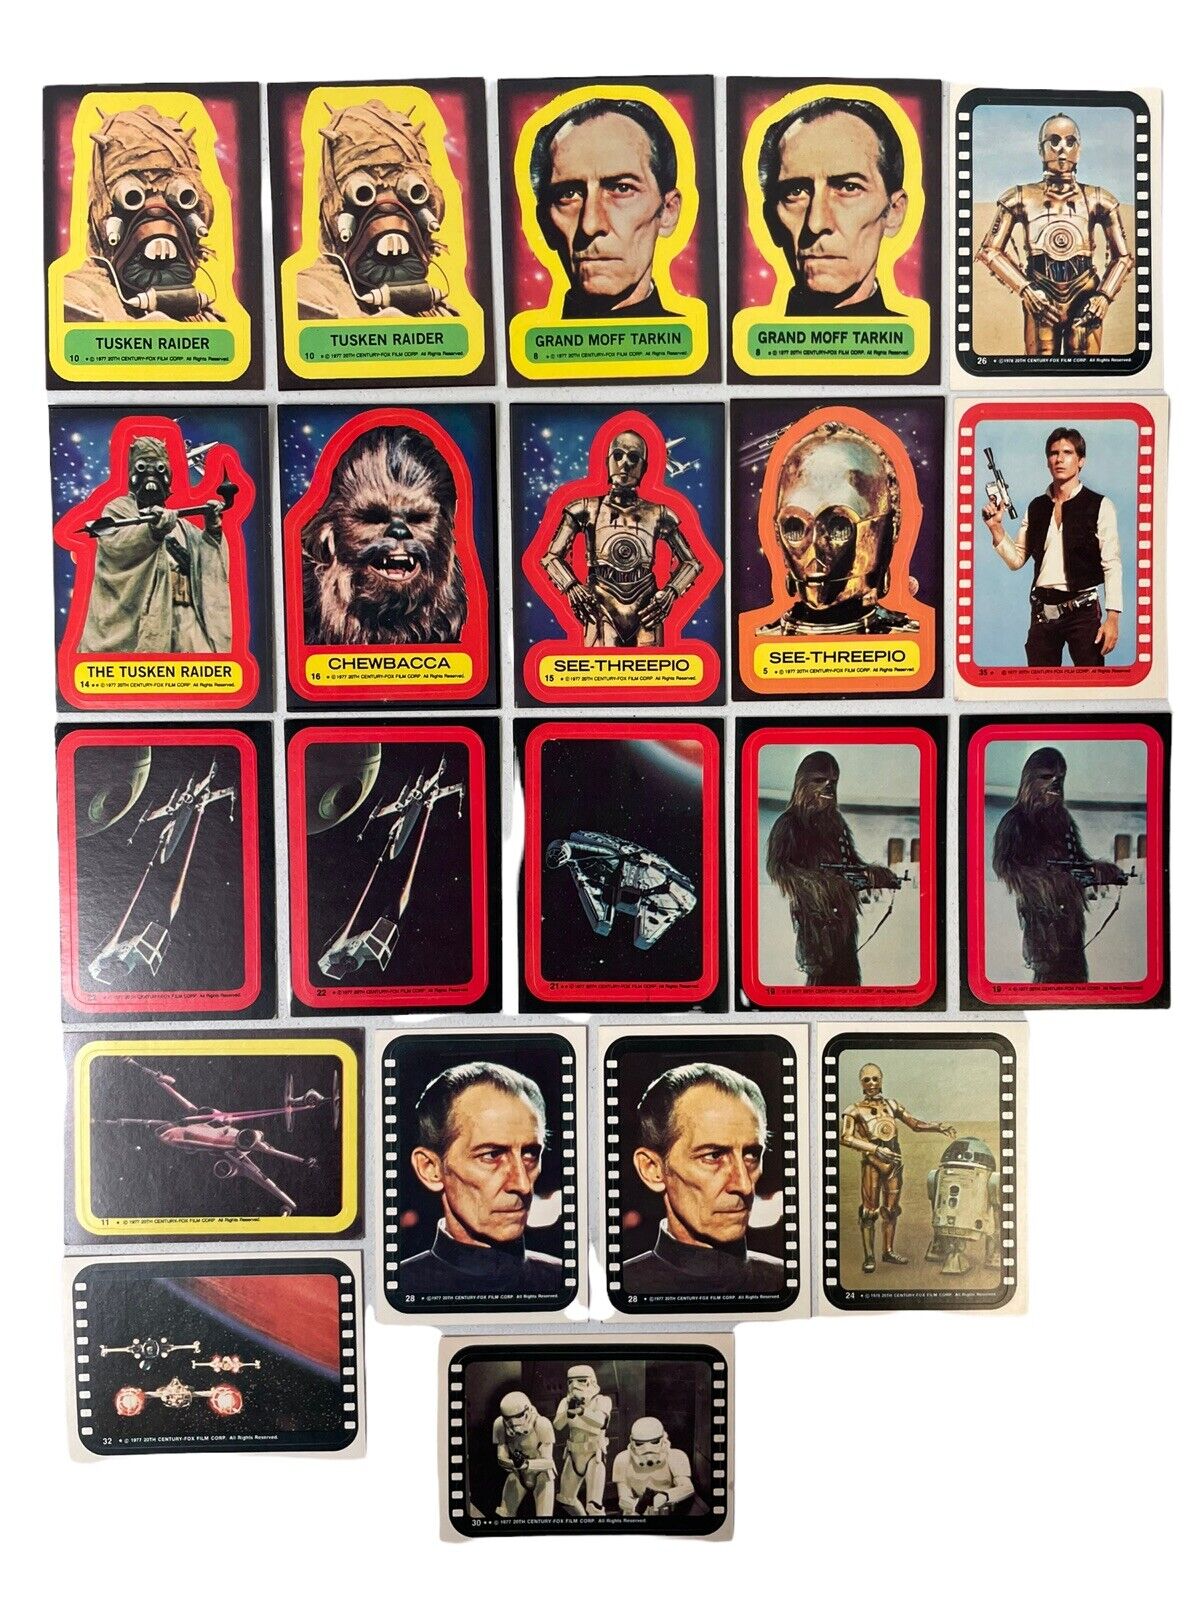 Lot Of 21: 1977 Vintage 20th Century Fox STAR WARS Series Stickers Very Good Con